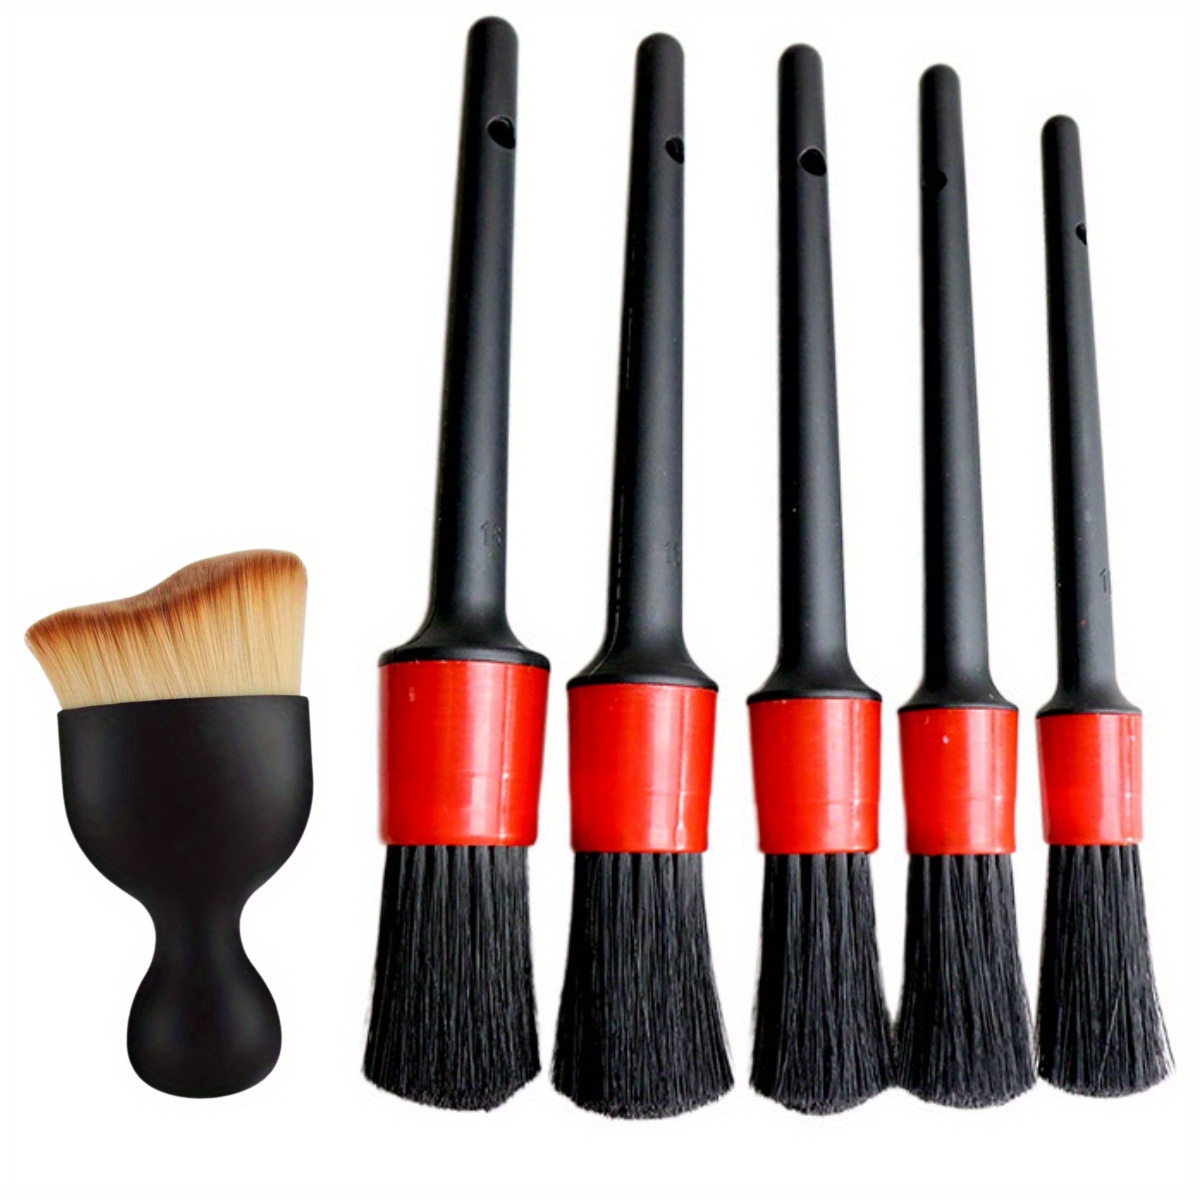 Wheel Brushes For Cleaning Wheels Car Washing Brushes With Long Handle  Multipurpose Wheel Brushes Car Detailing Brushes To Clean - AliExpress